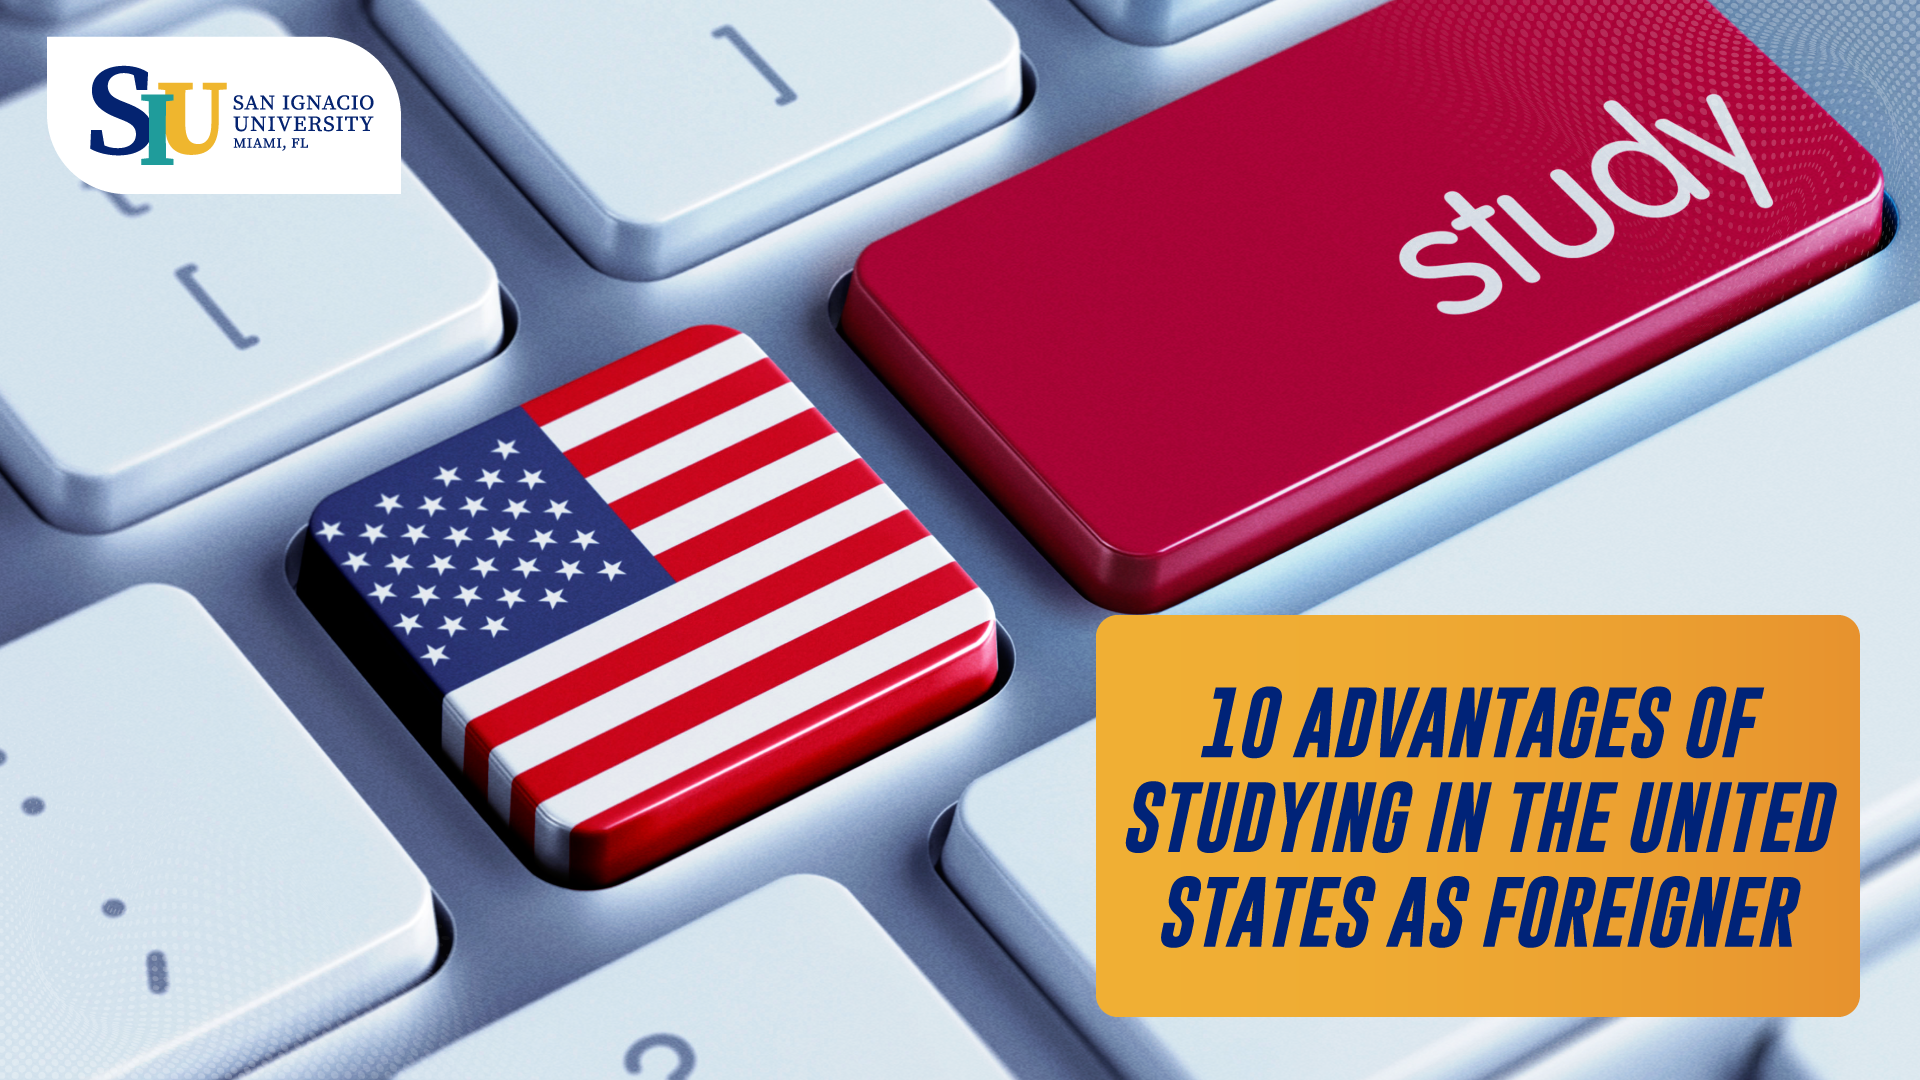 Ten advantages of studying in the United States as foreigner